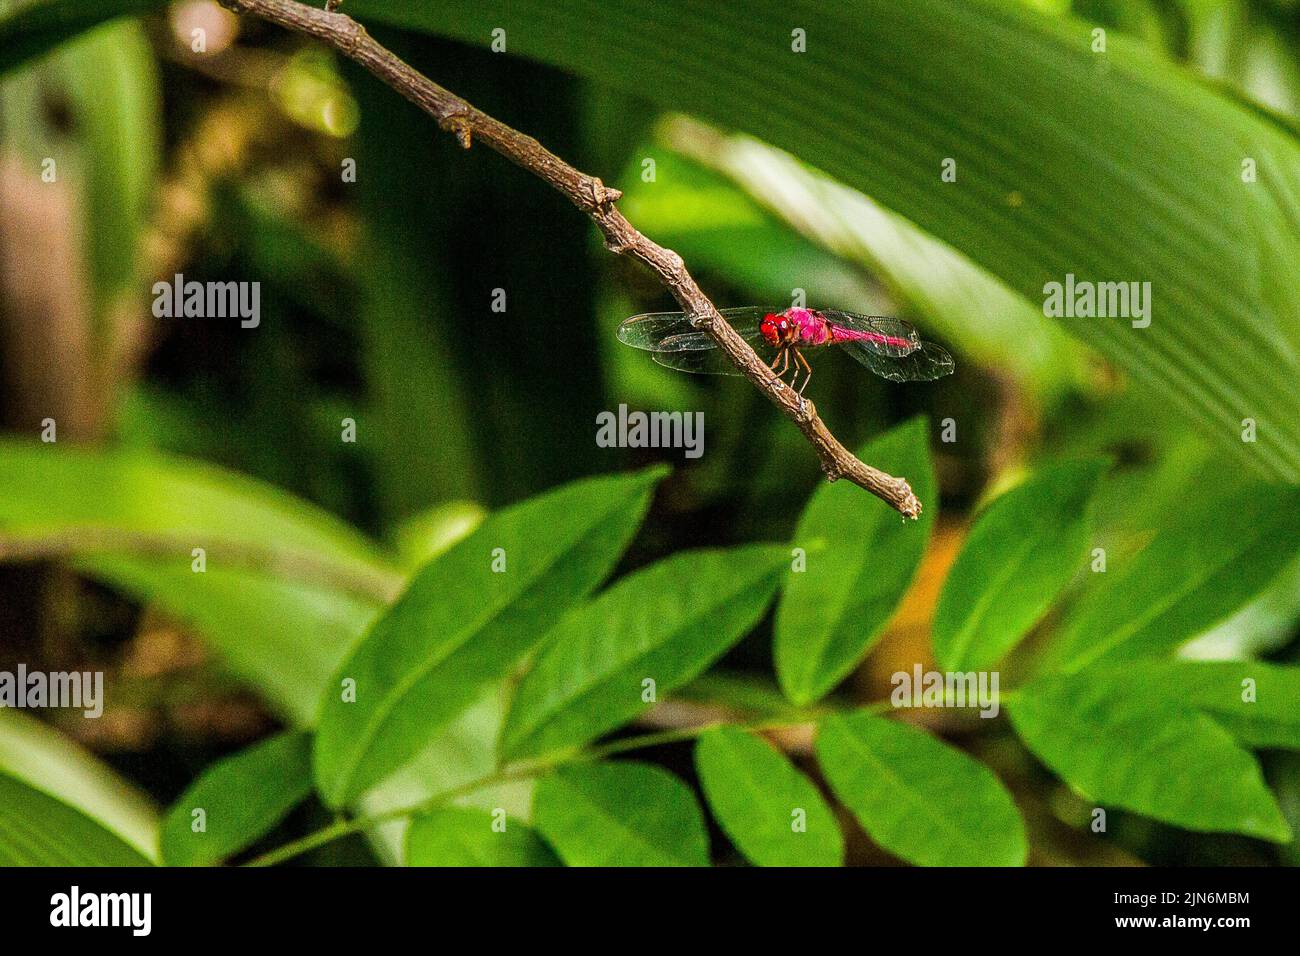 Brazilian insects outdoors Stock Photo